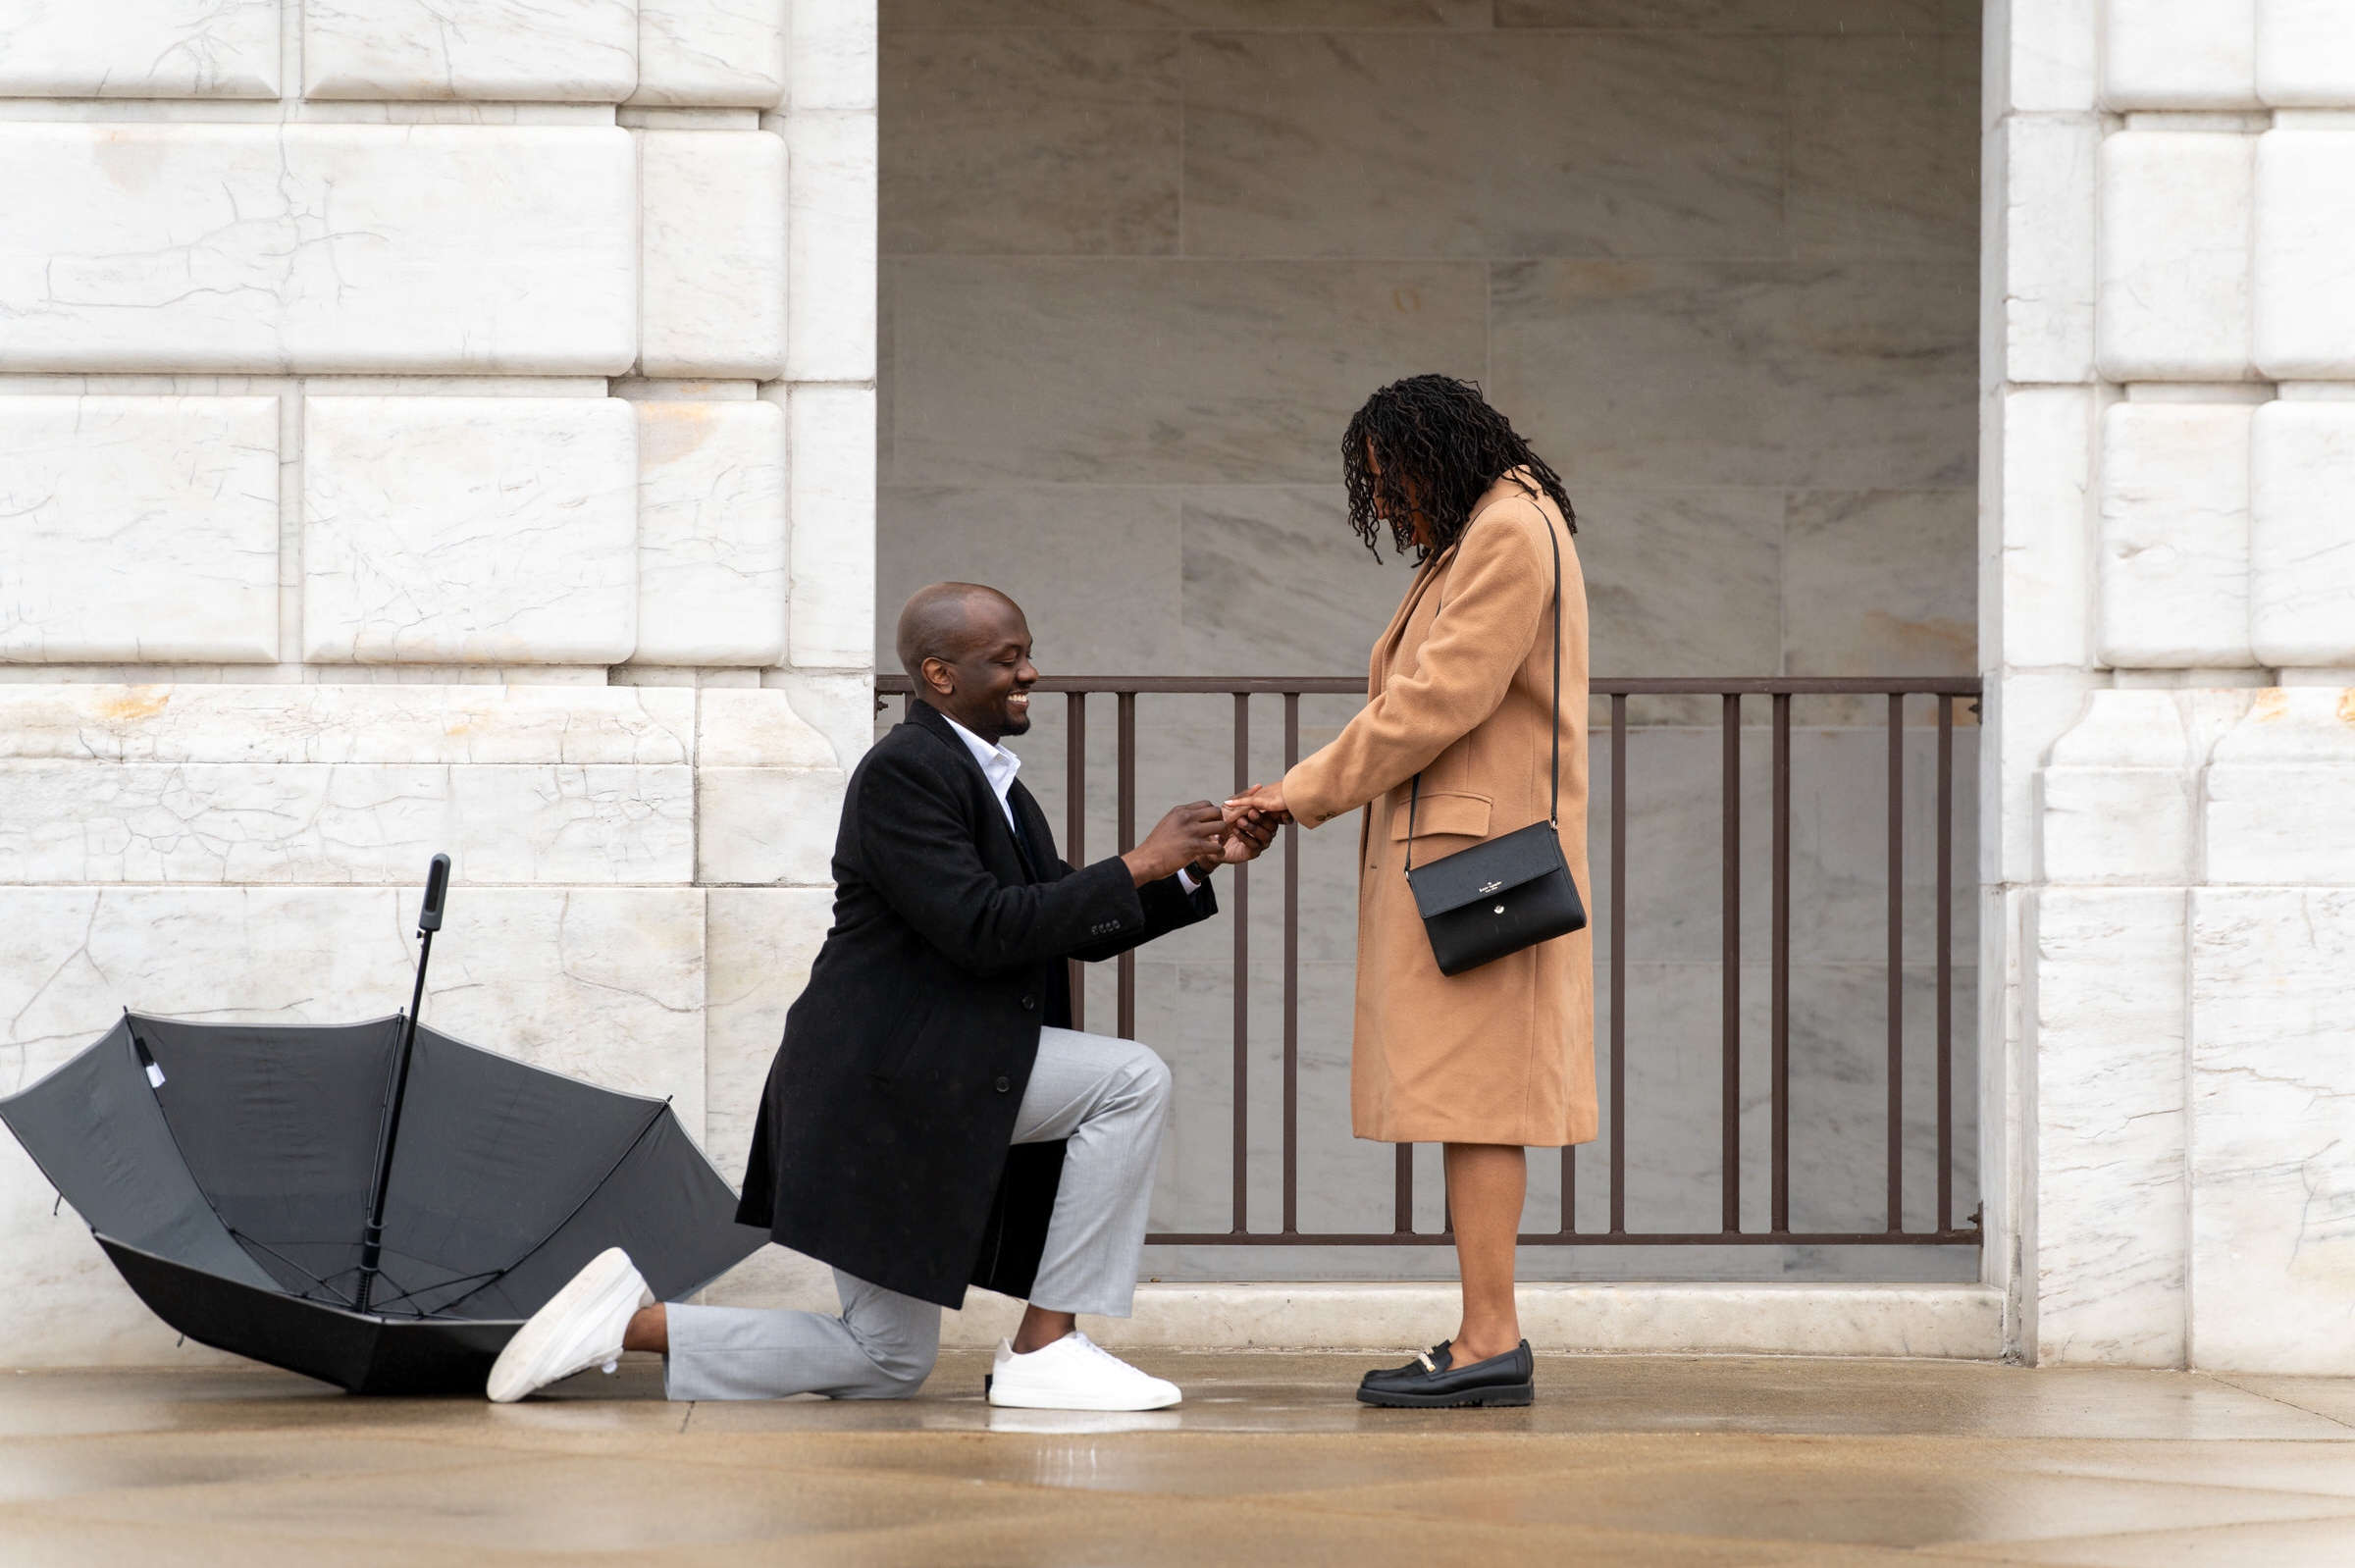 A gentleman takes a knee during a marriage proposal at the DIA.